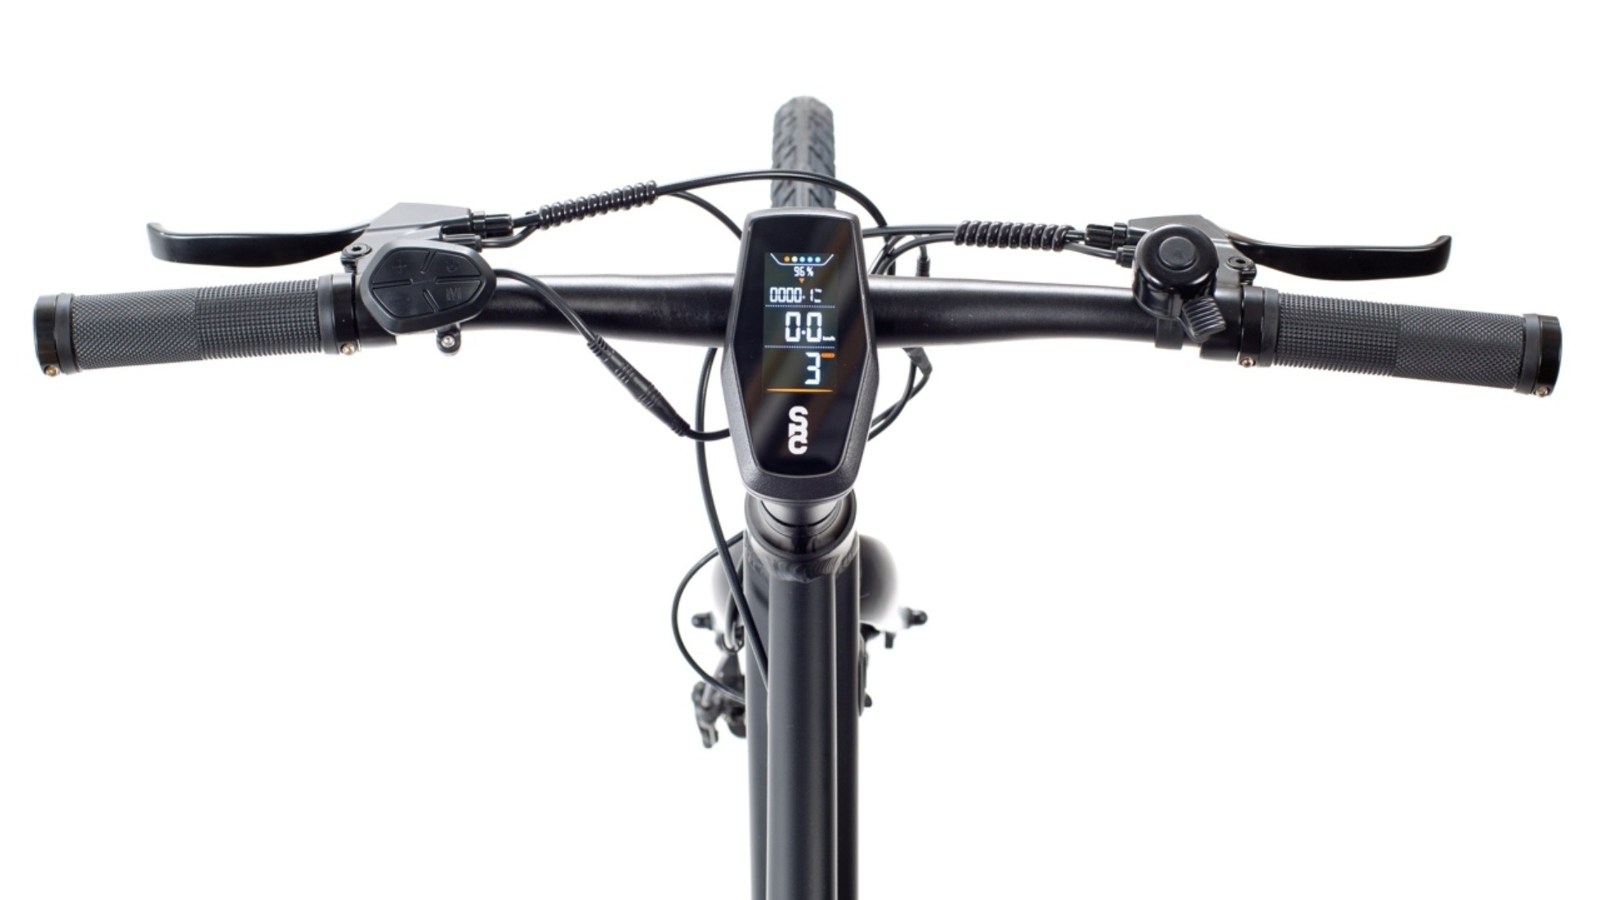 6061 eBike Commuter; detail of the handlebar-mounted LCD screen and controller 